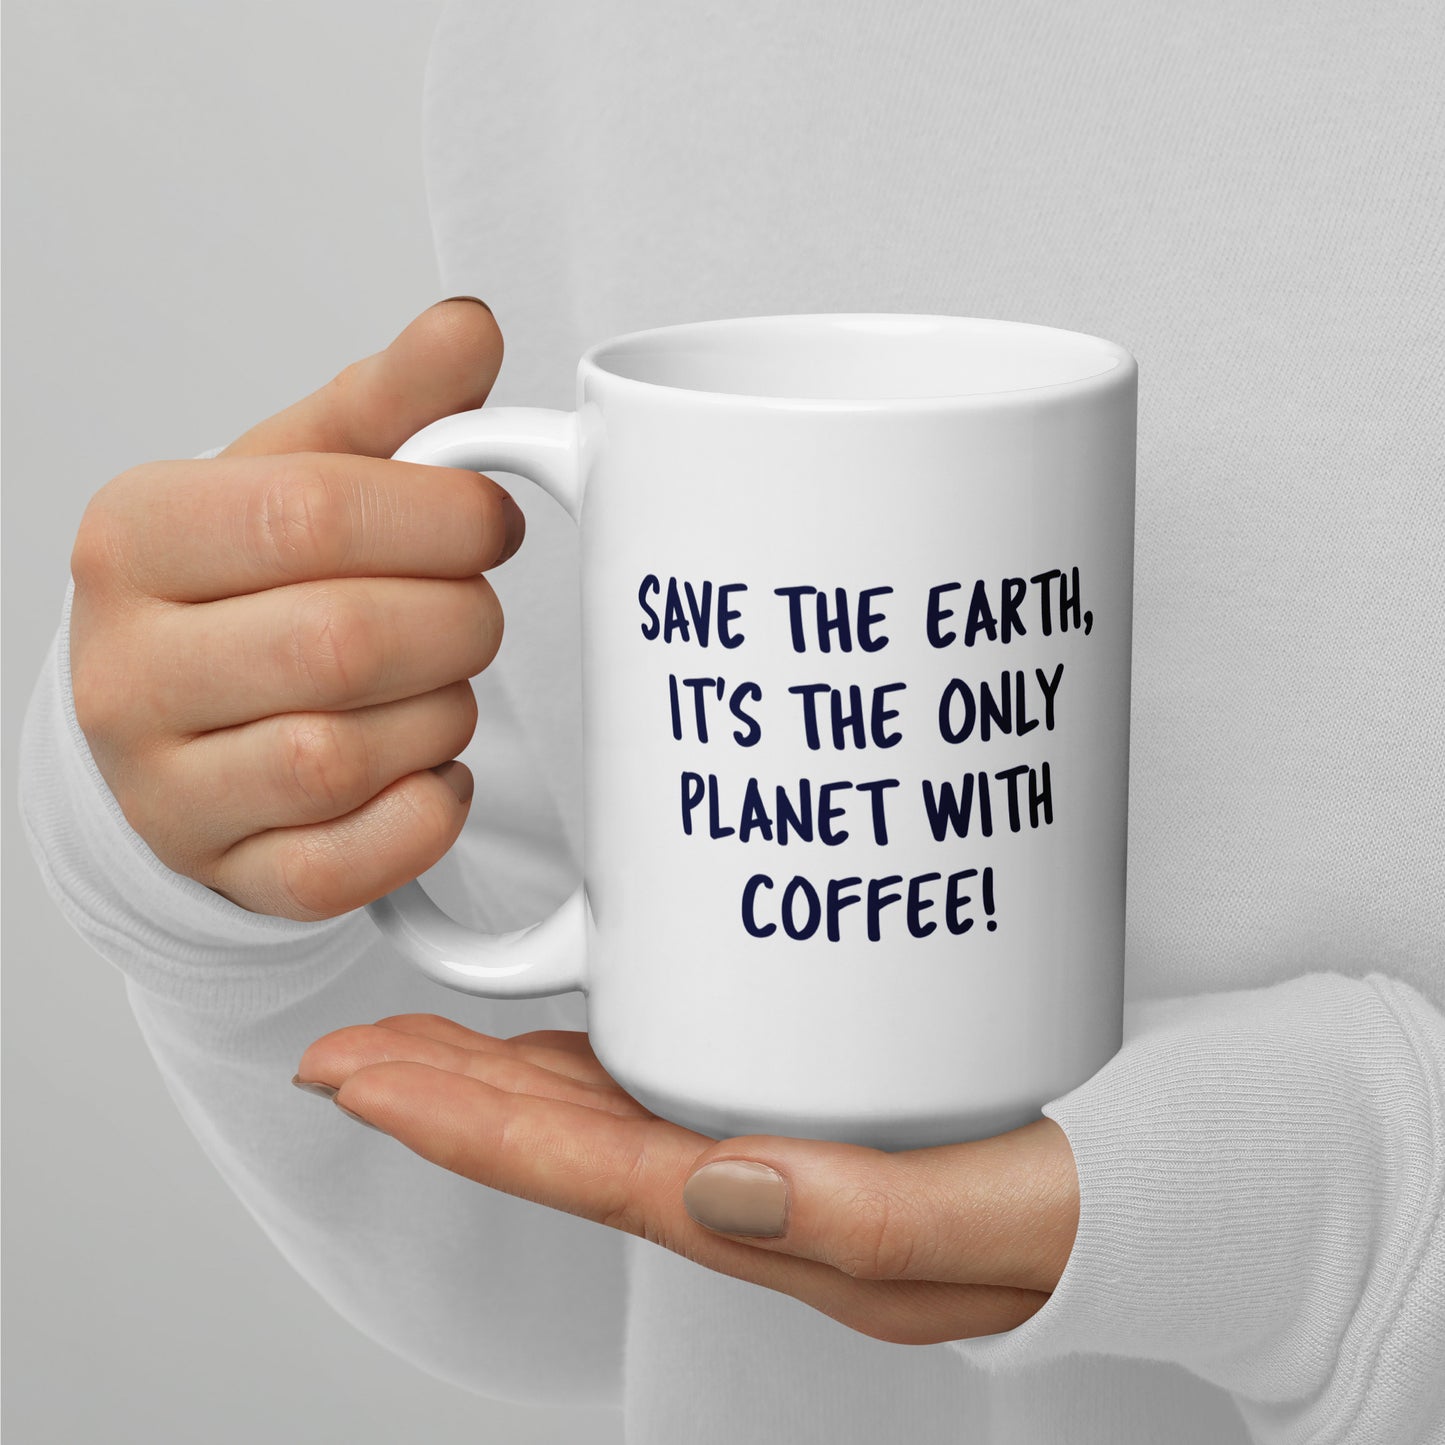 Save The Earth It's The Only Planet With Coffee Mug, Statement Funny Sayings Climate Change Day Coffee Tea Cup Ceramic 11 15oz Gift - Starcove Fashion